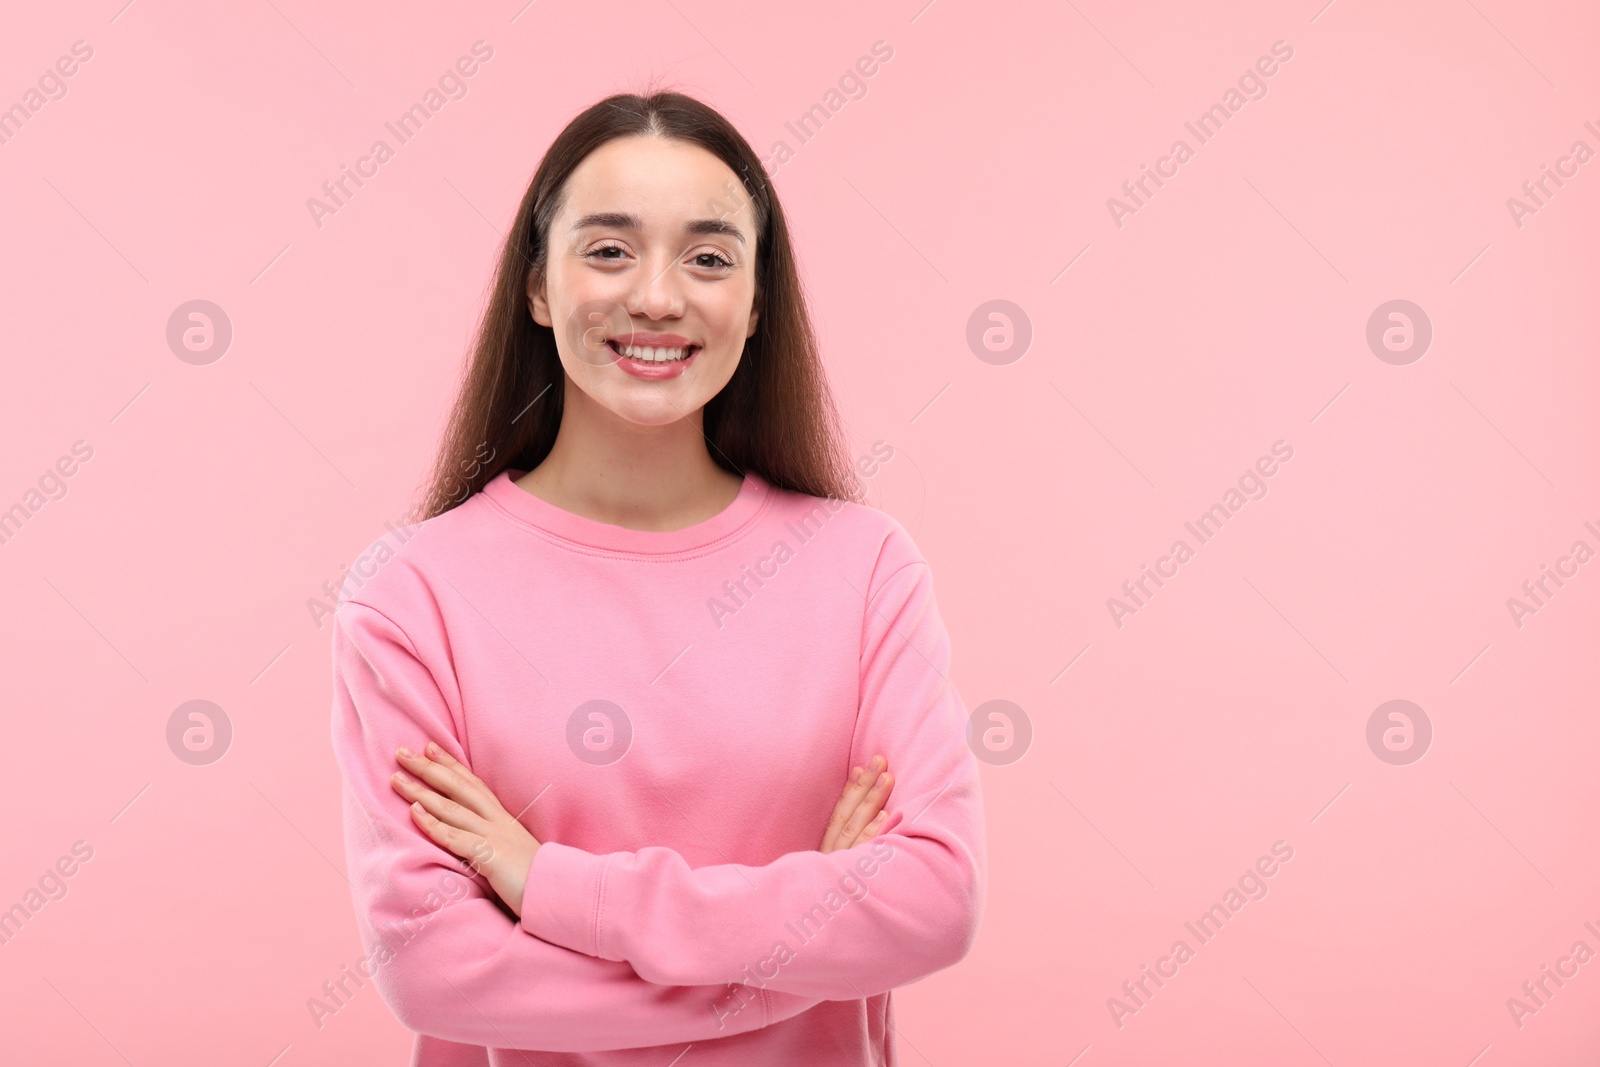 Photo of Beautiful woman with clean teeth smiling on pink background, space for text